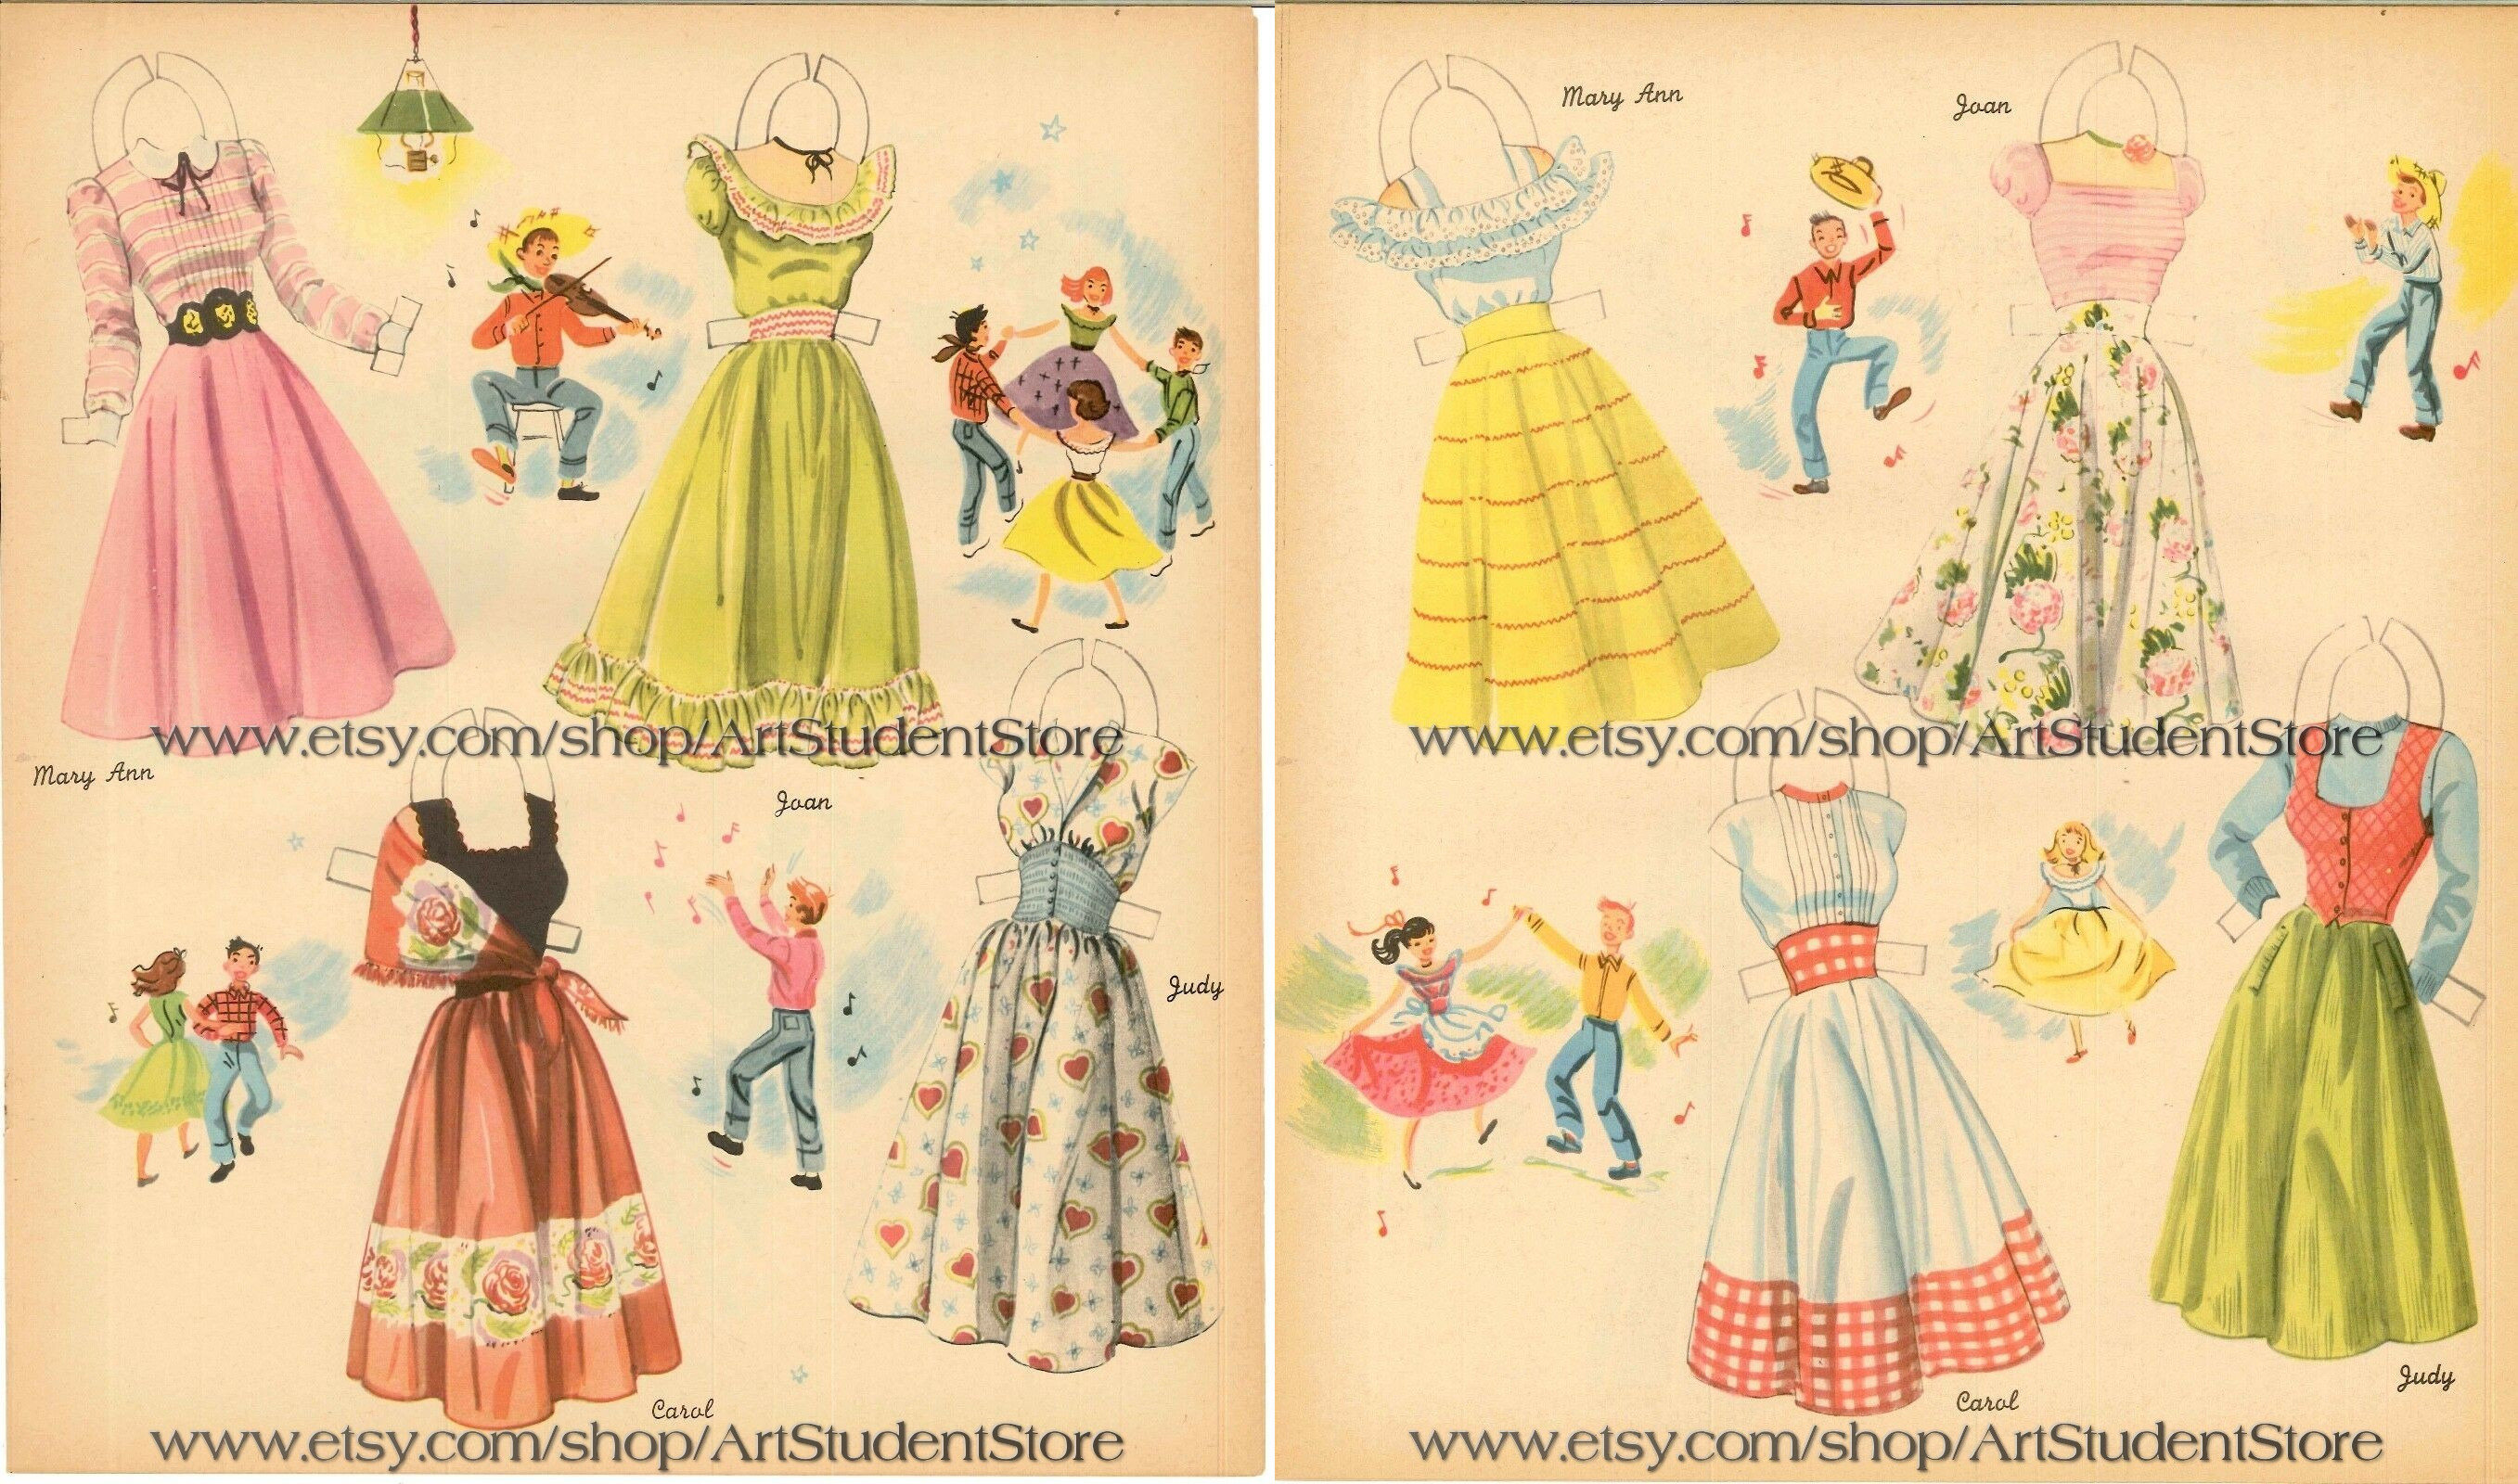 4 Little Girls Paper Dolls. 1950s Fashions. Southern Belle Fashion. 